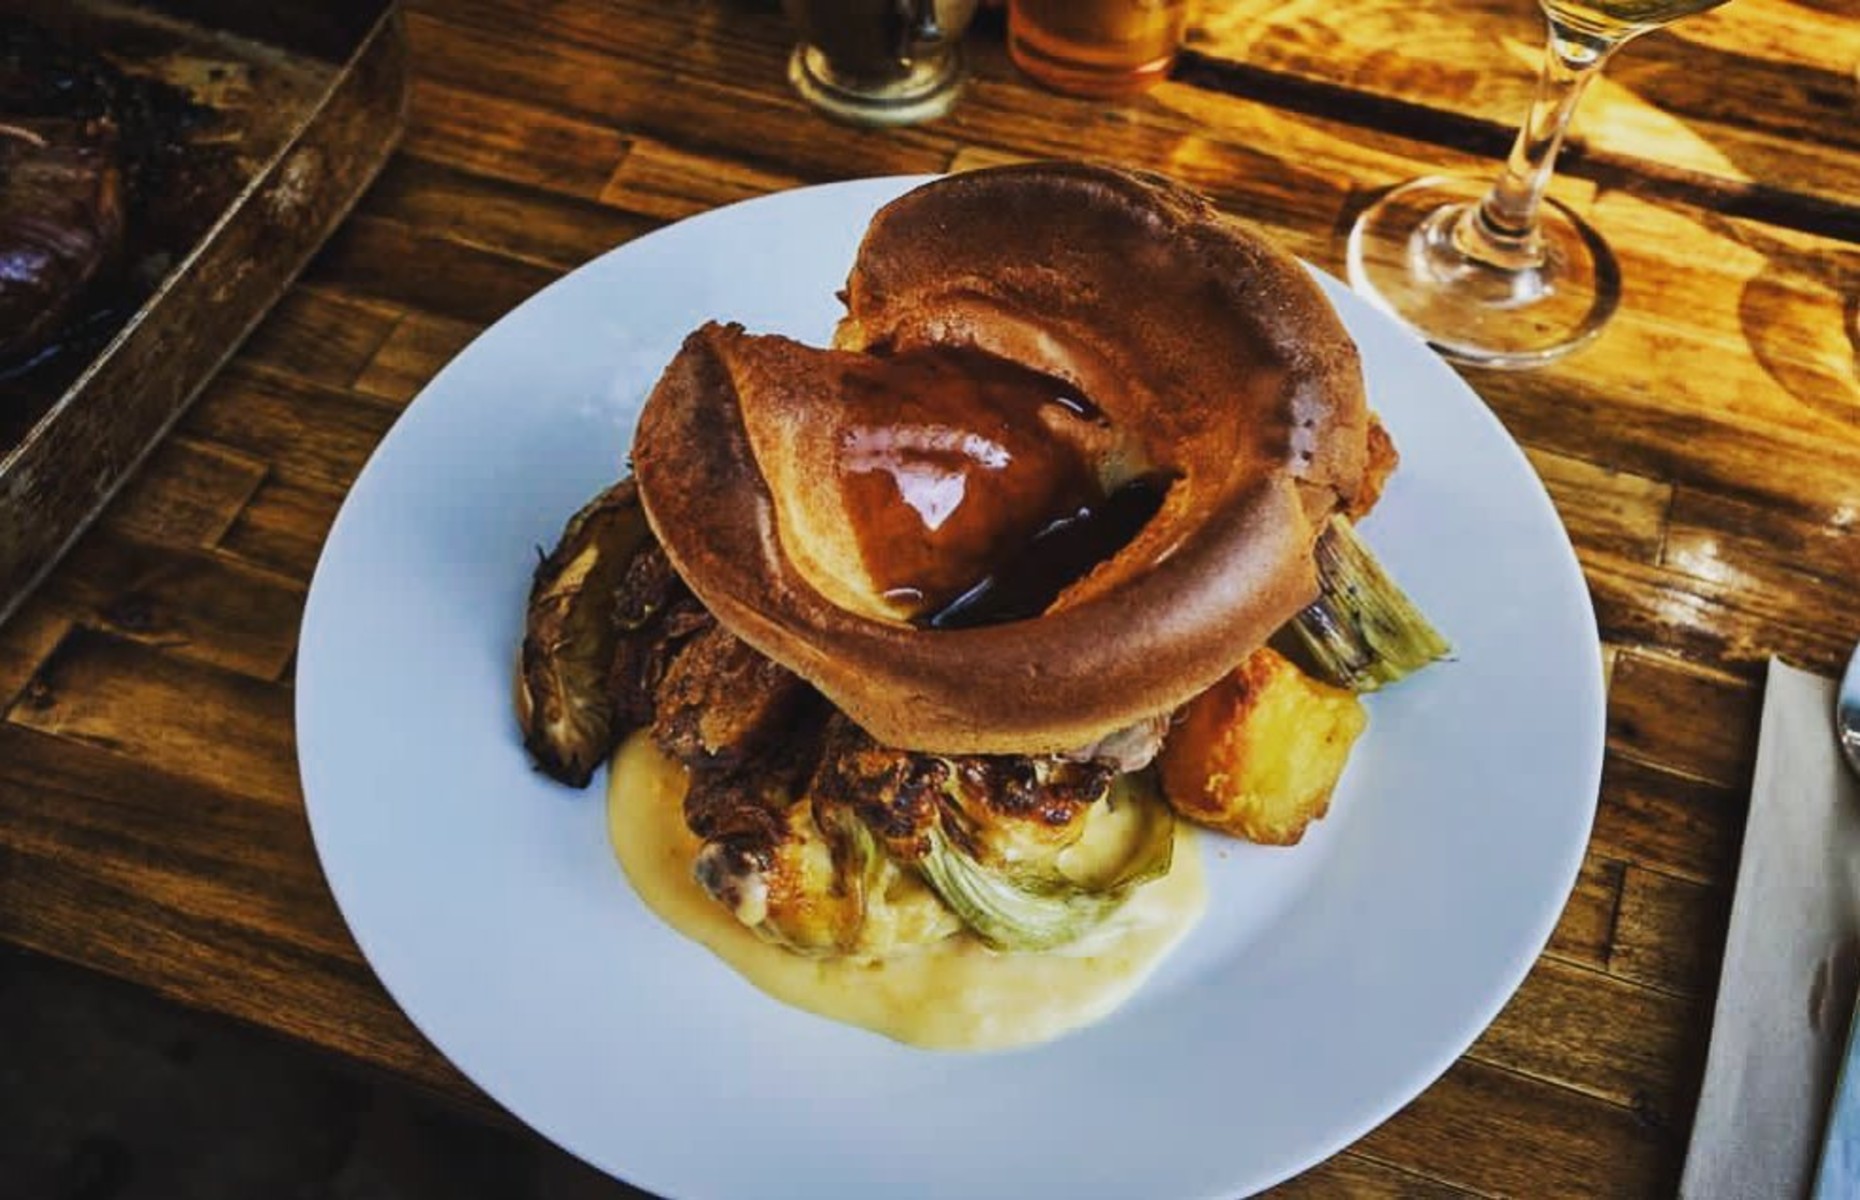 A roast at the George and Heart (Image: The George and Heart/Facebook)